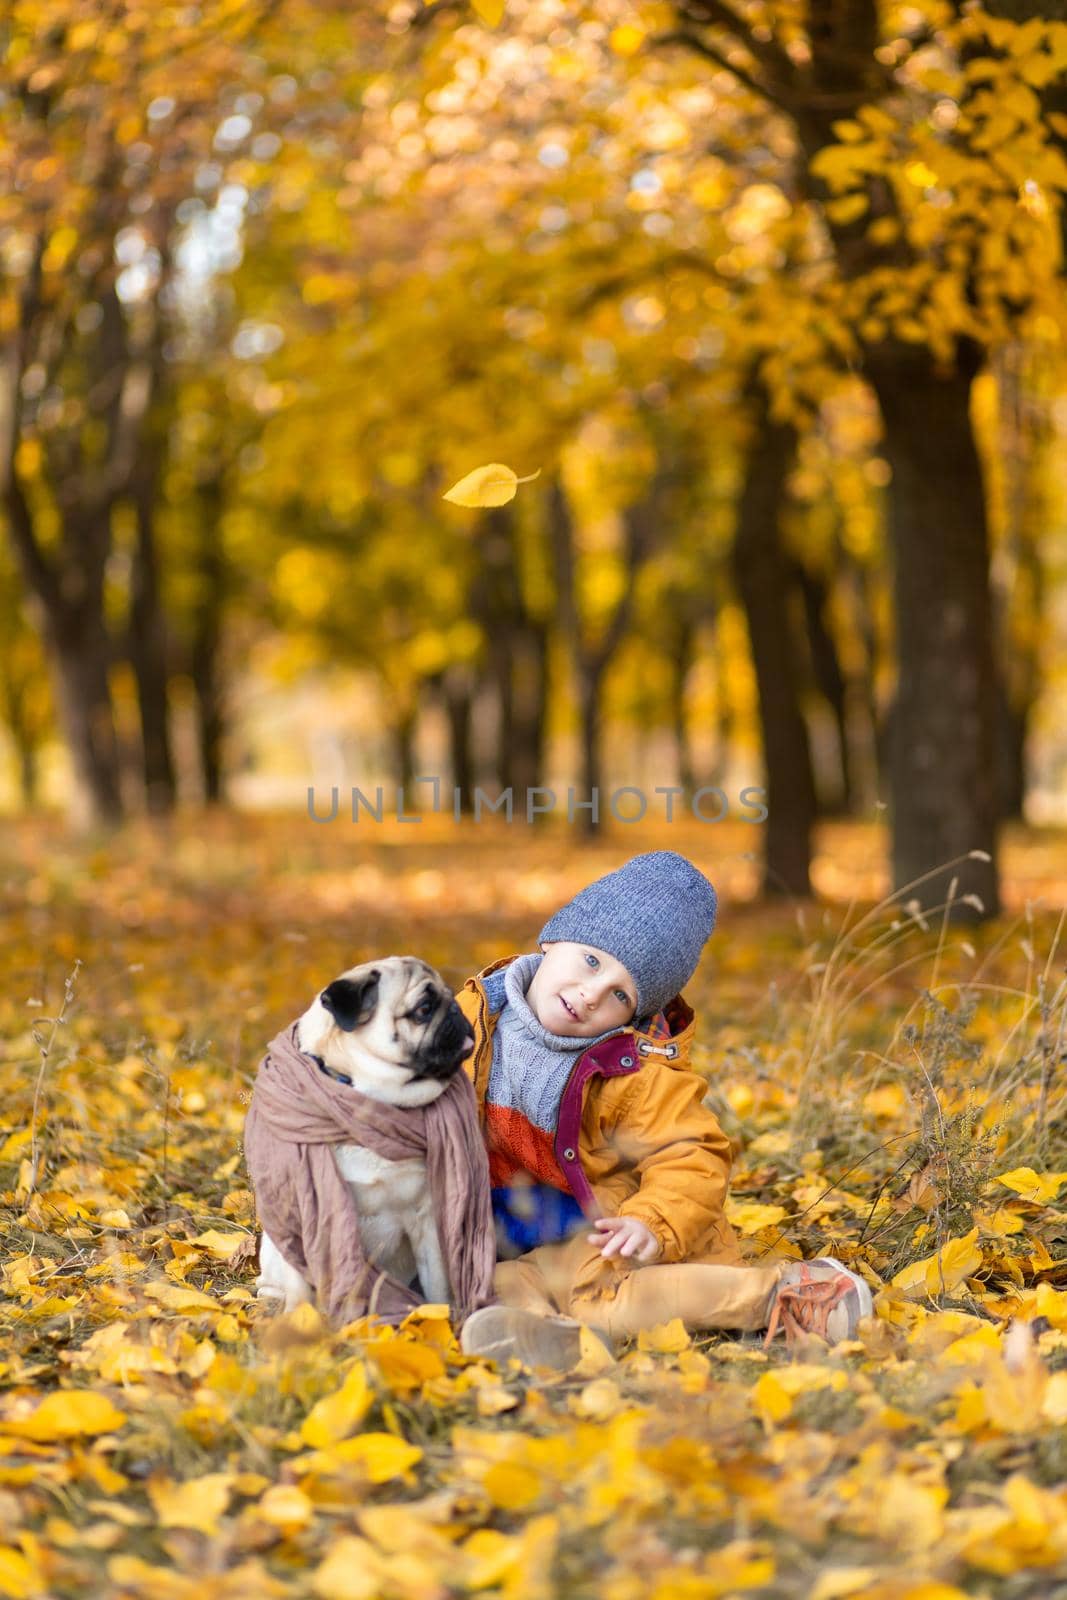 A child sit in fallen yellow leaves with a pug in the autumn park. Friends since childhood by Try_my_best